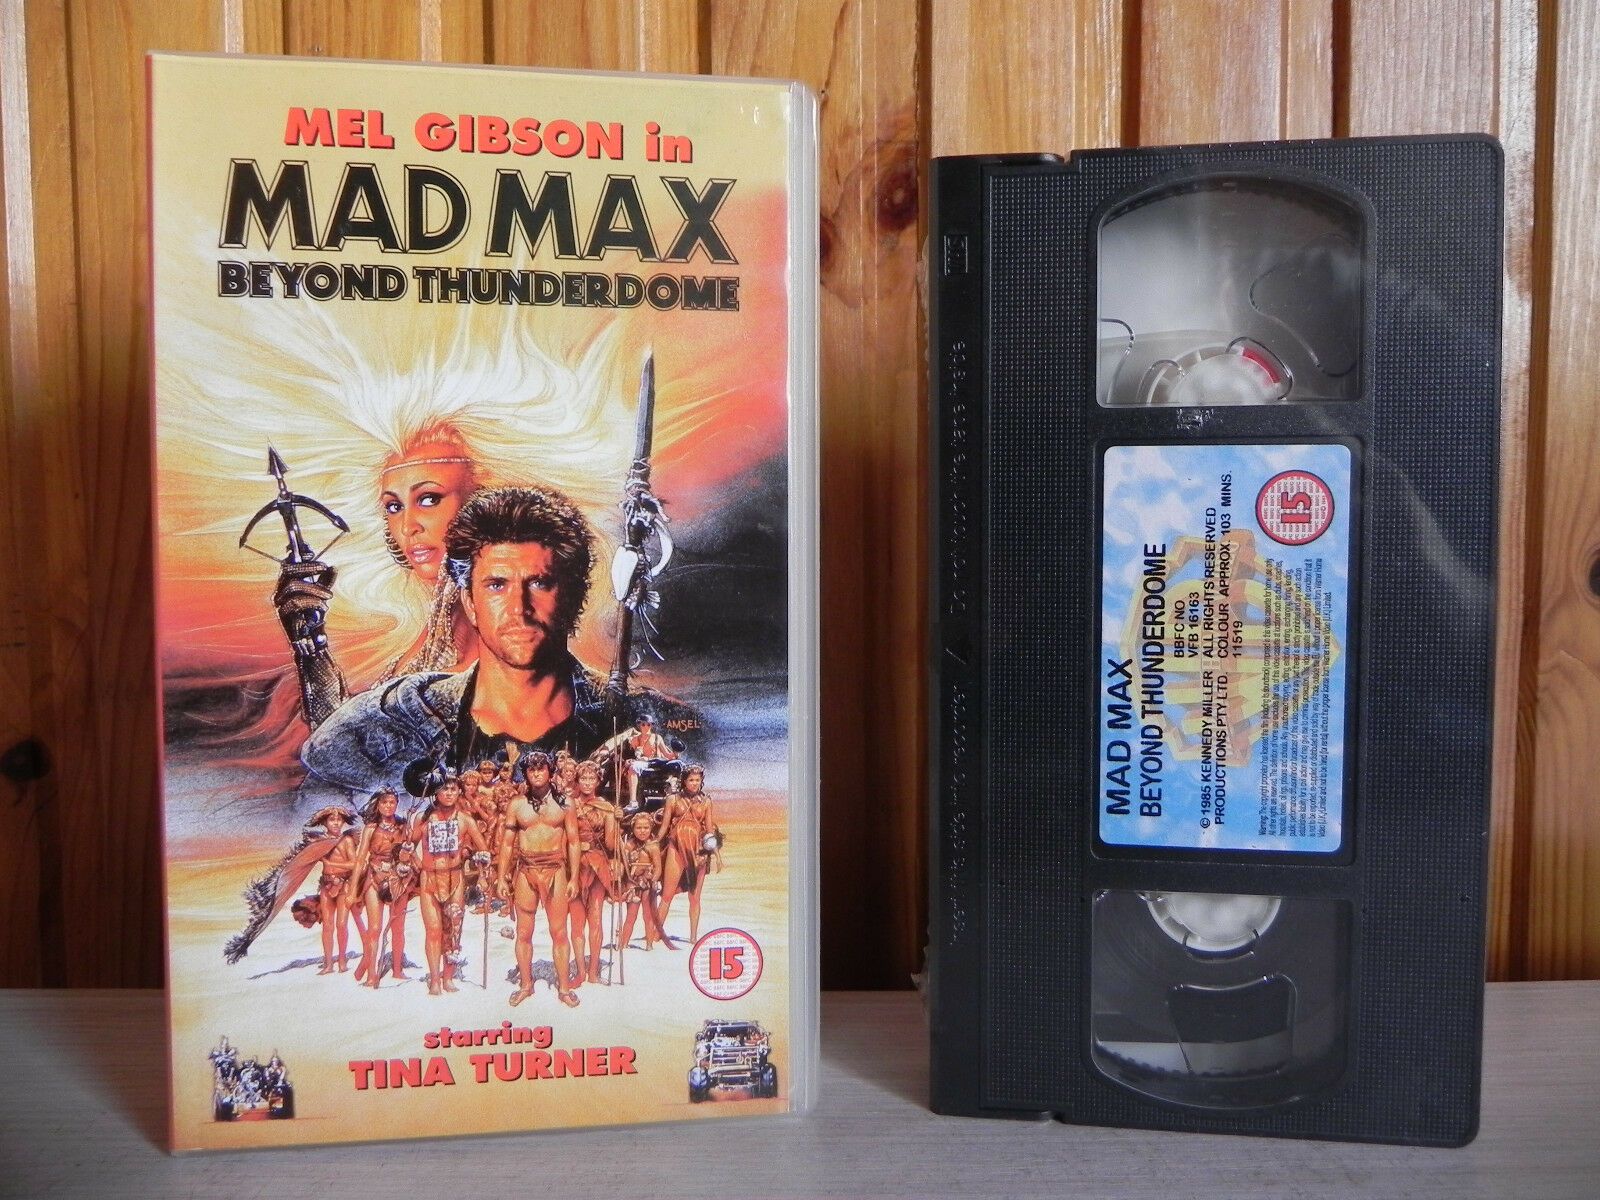 Mad Max - Beyond Thunderdome - Warner Action - Brand New Sealed - M.Gibson - VHS-